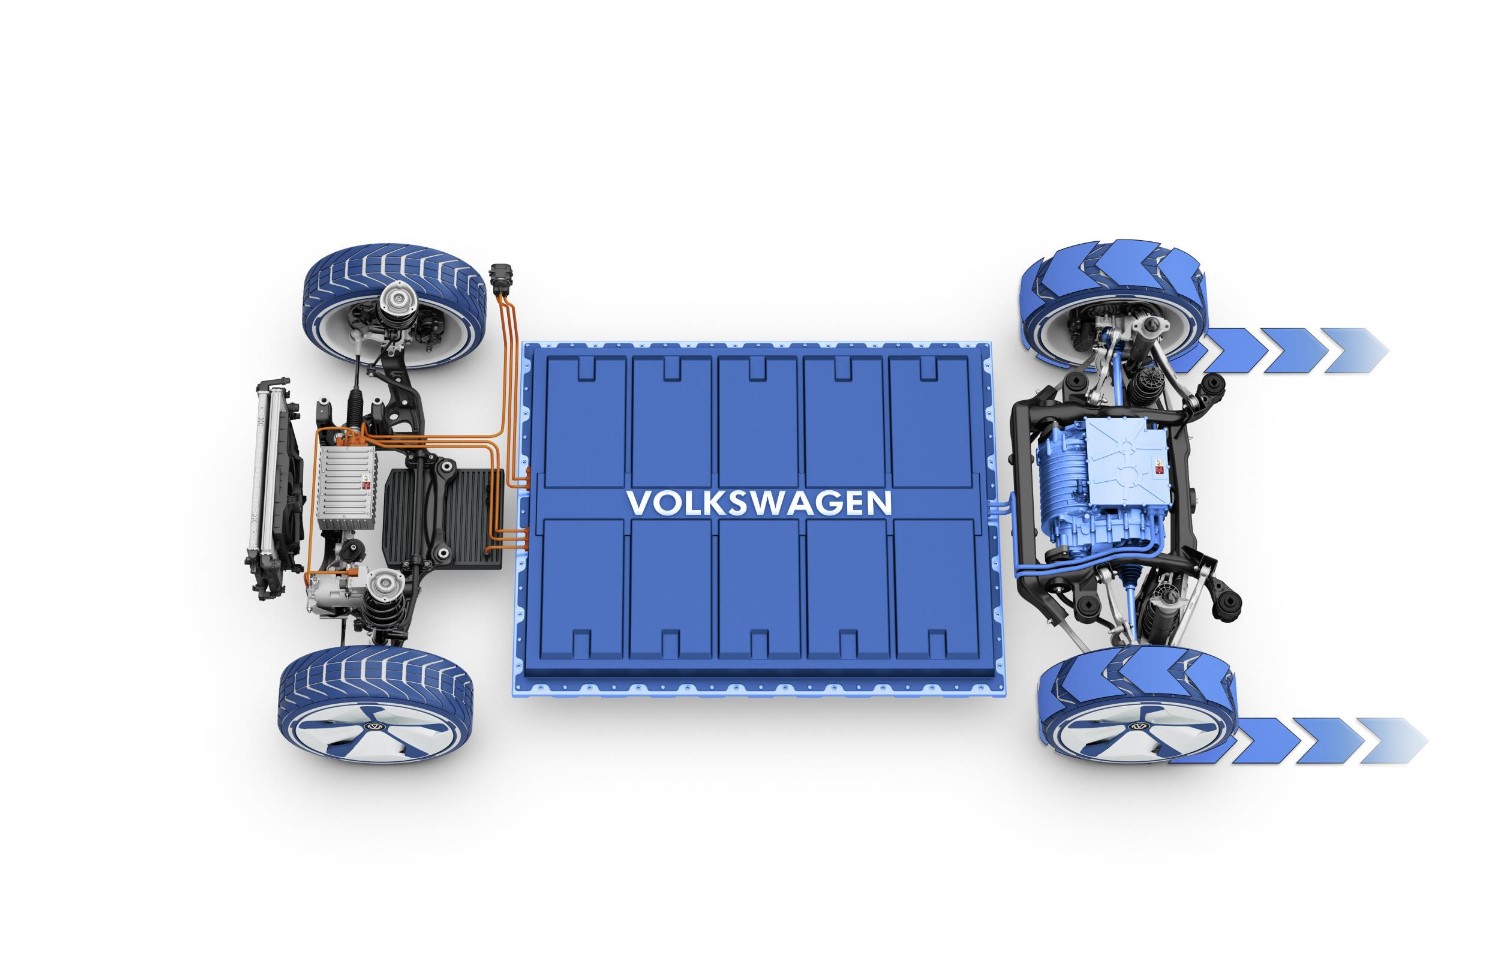 VW looking at adding Ultracapacitors to its Battery Pack architecture